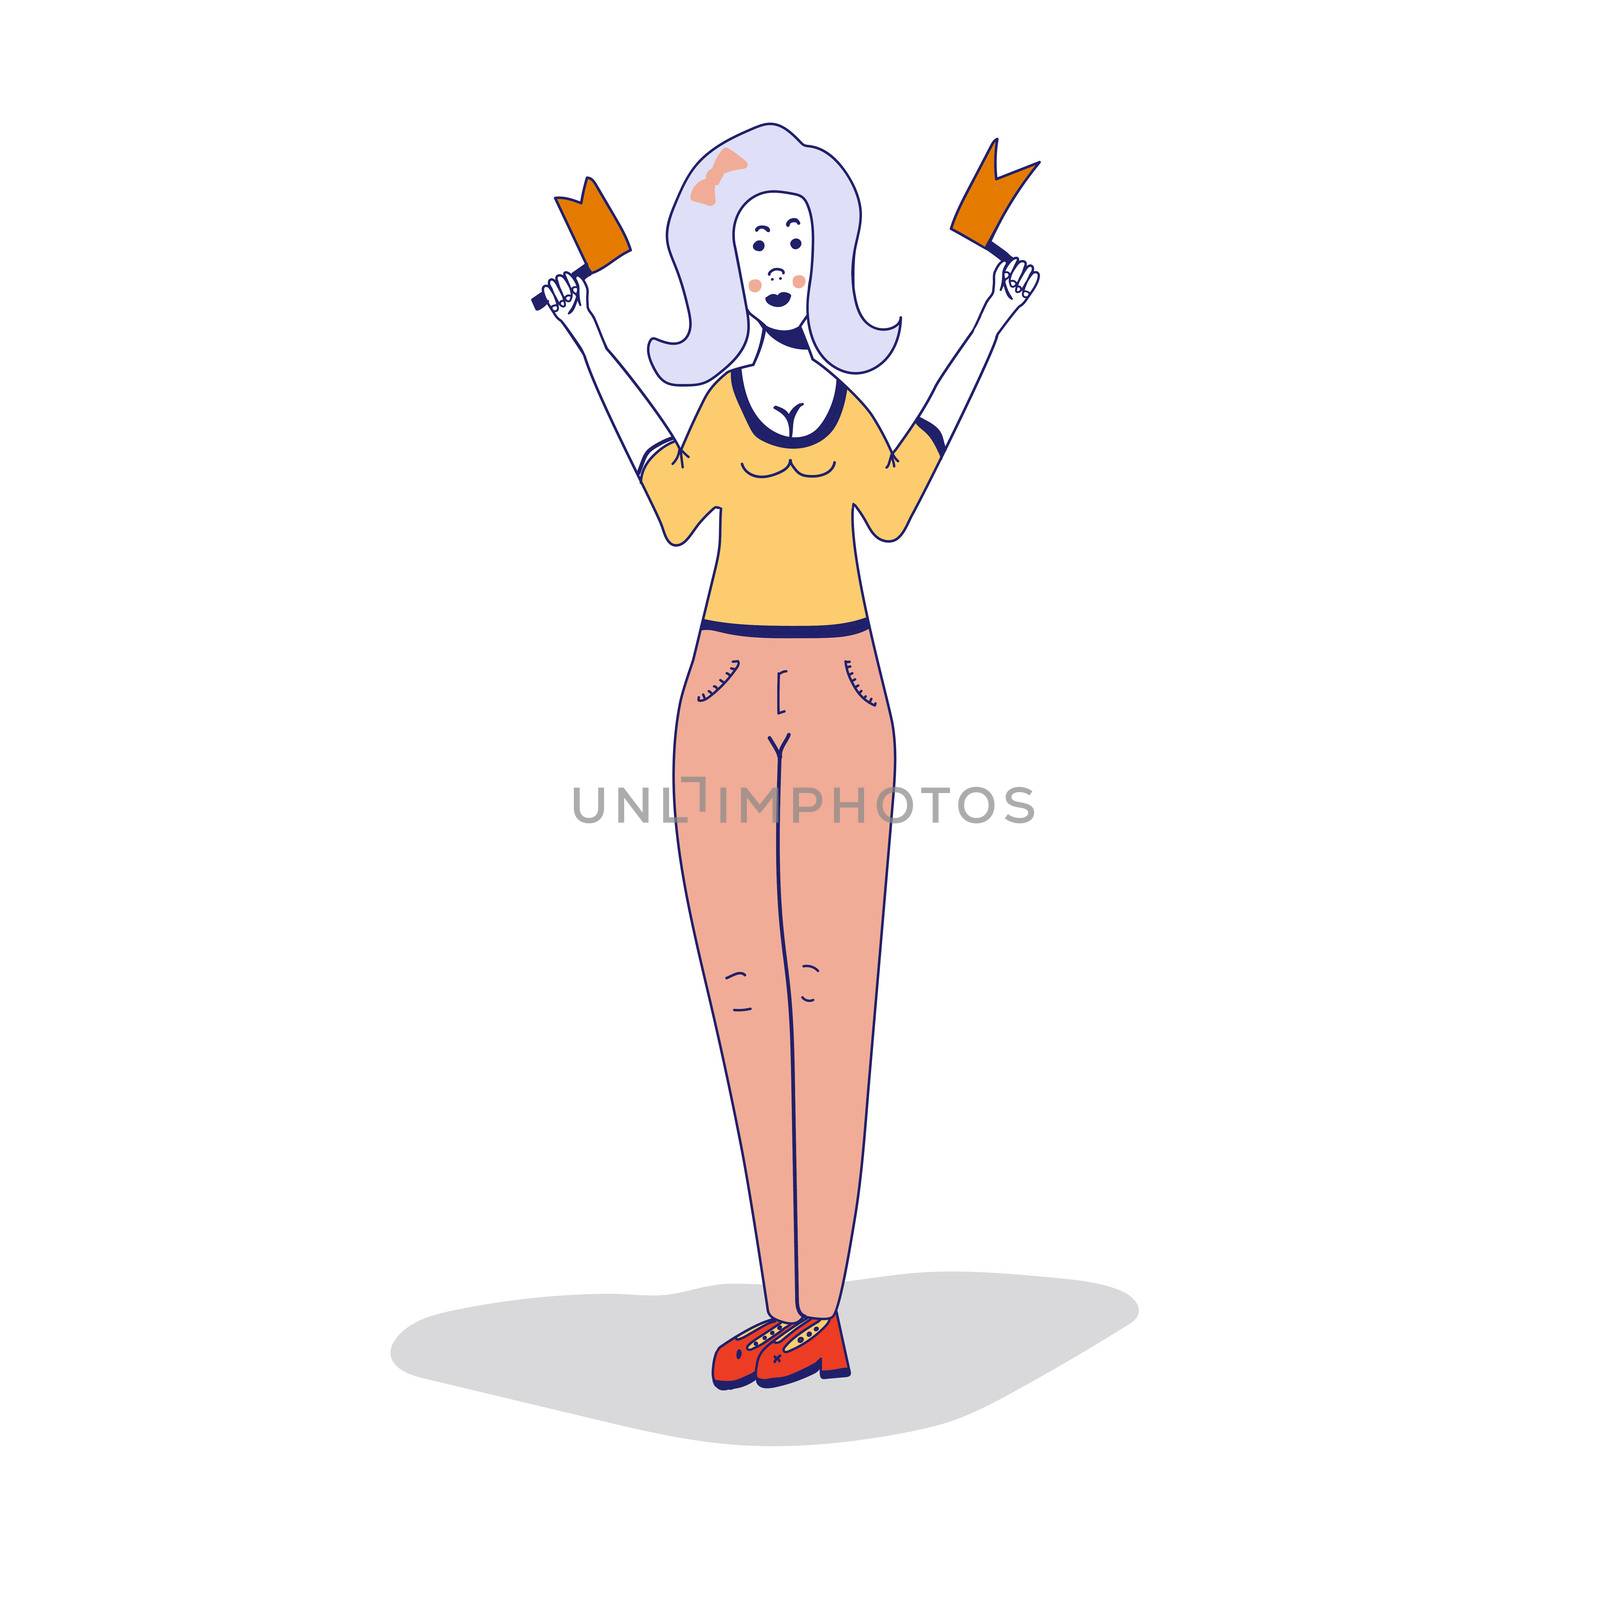 cartoon style illustration of a happy smiling girl holding a white flag empty banner for your design